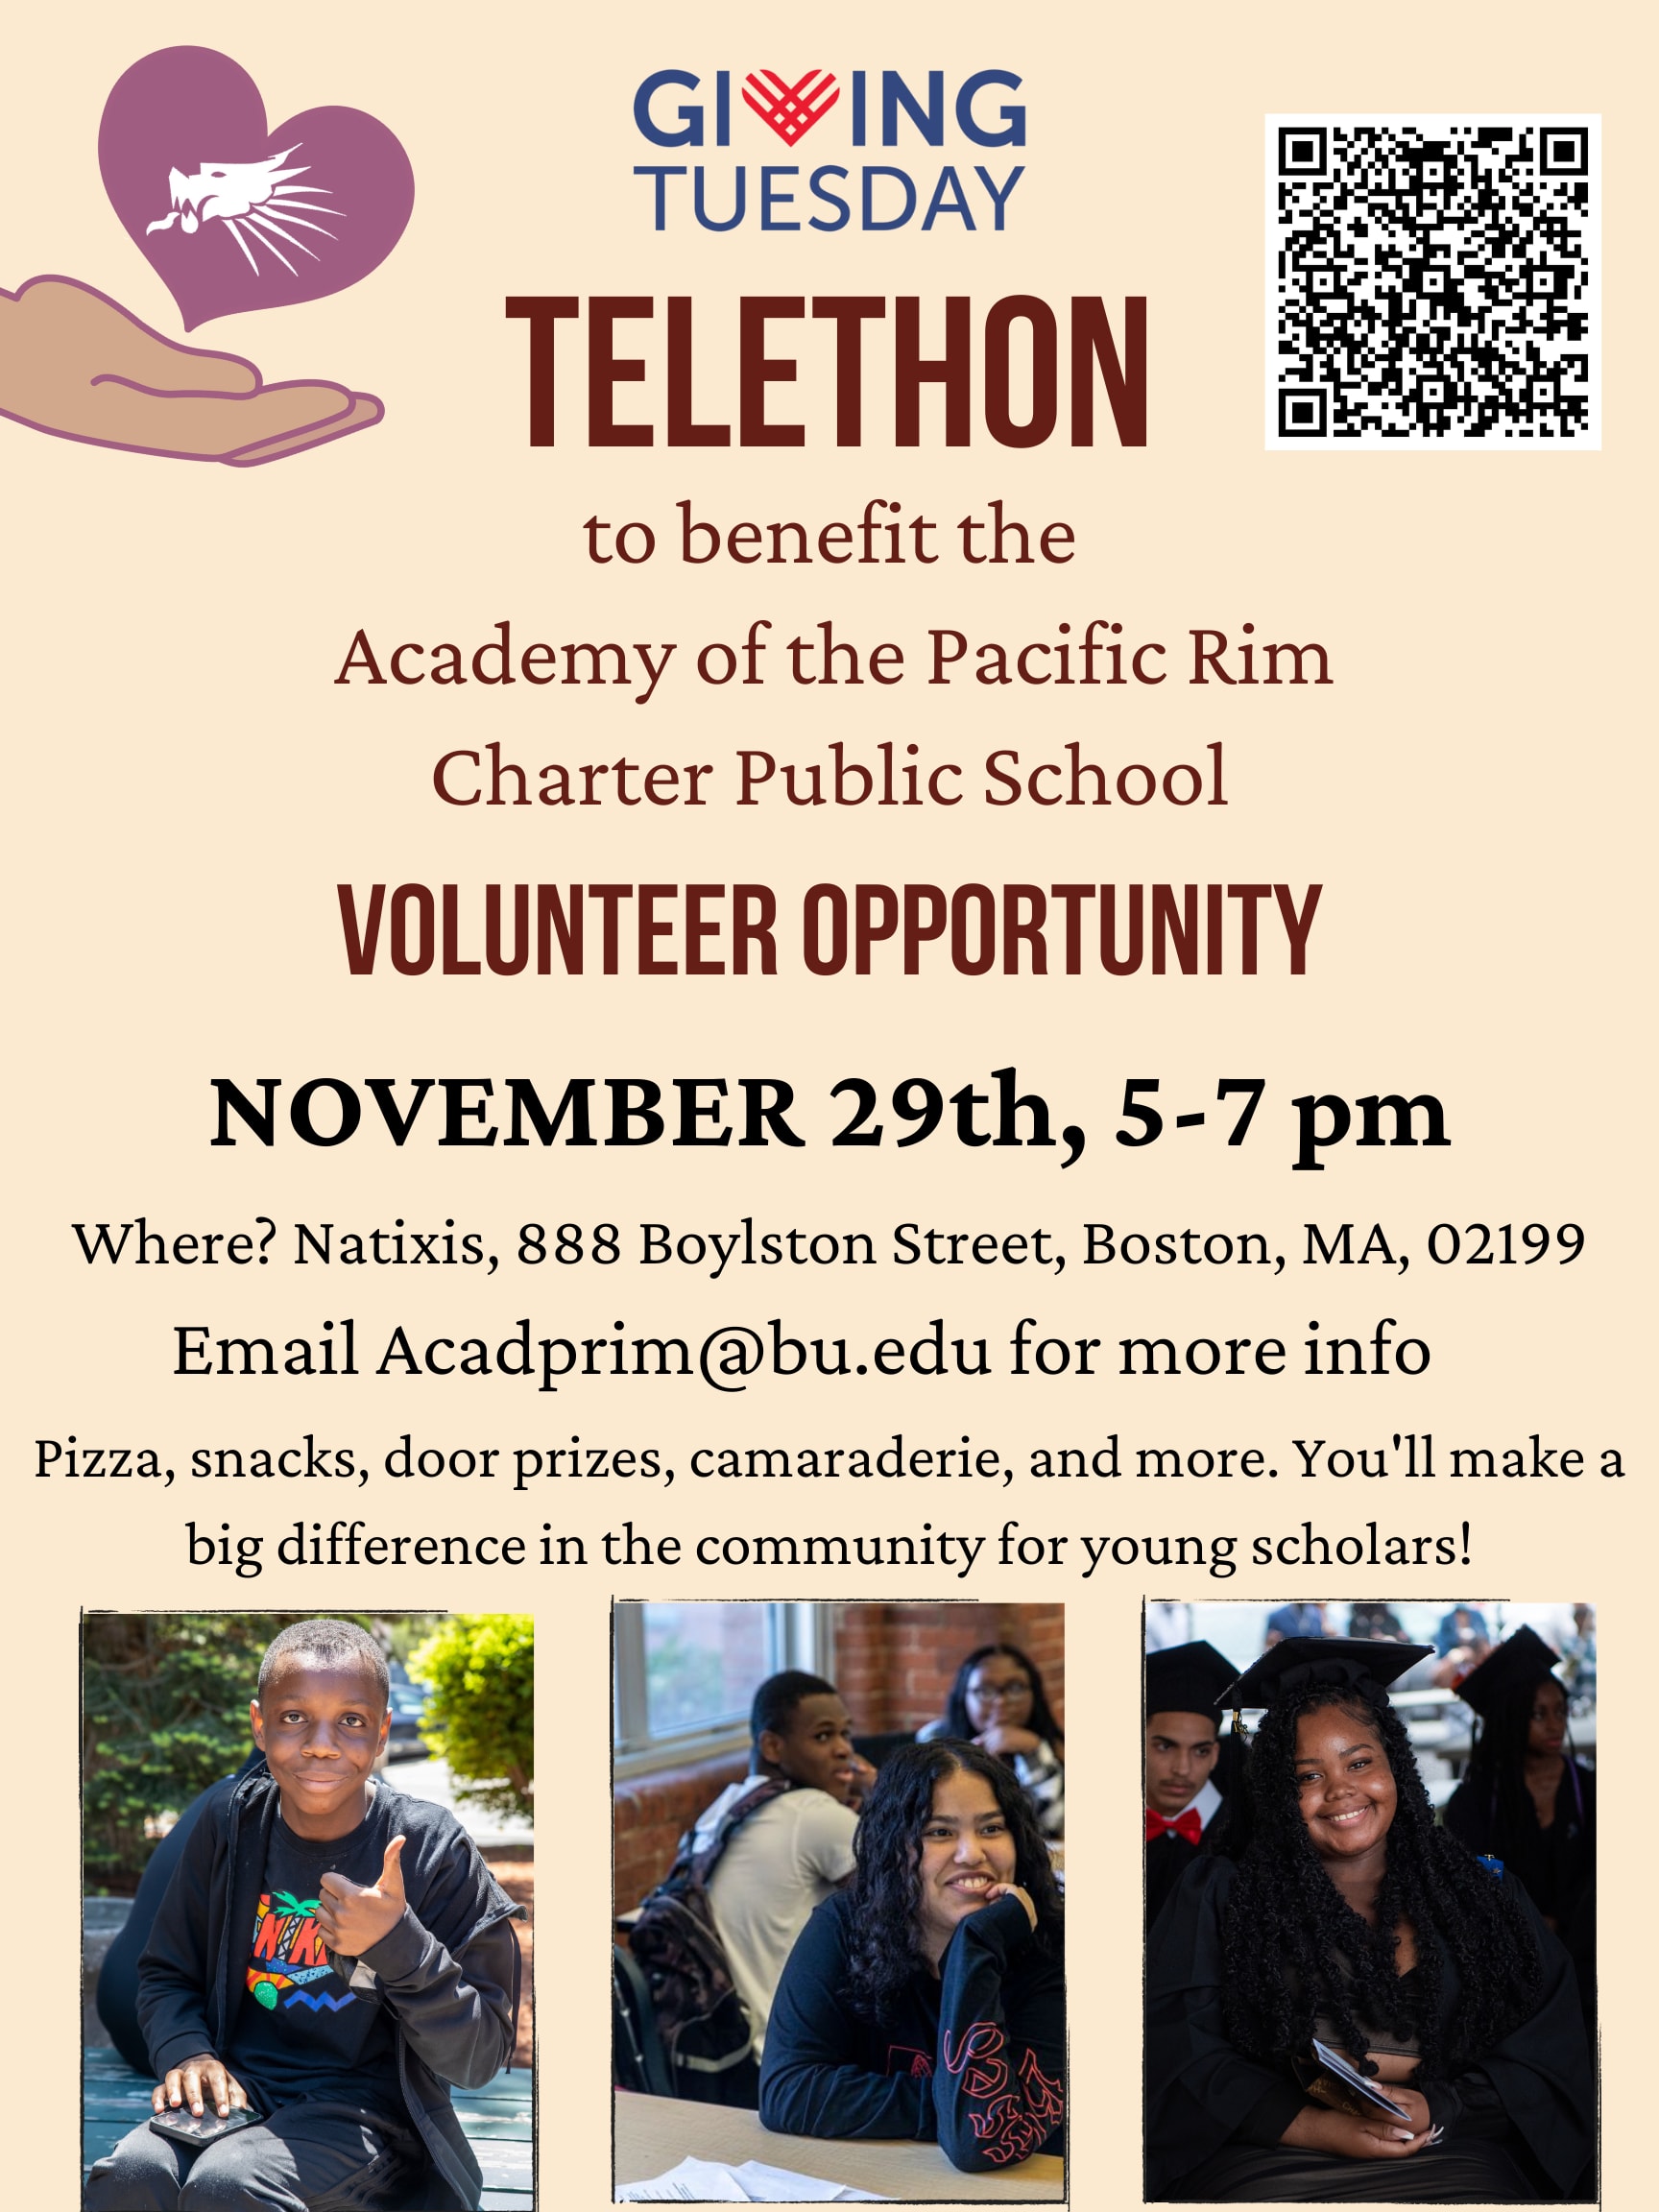 academy-of-the-pacific-rim-giving-tuesday-telethon-11-29-22